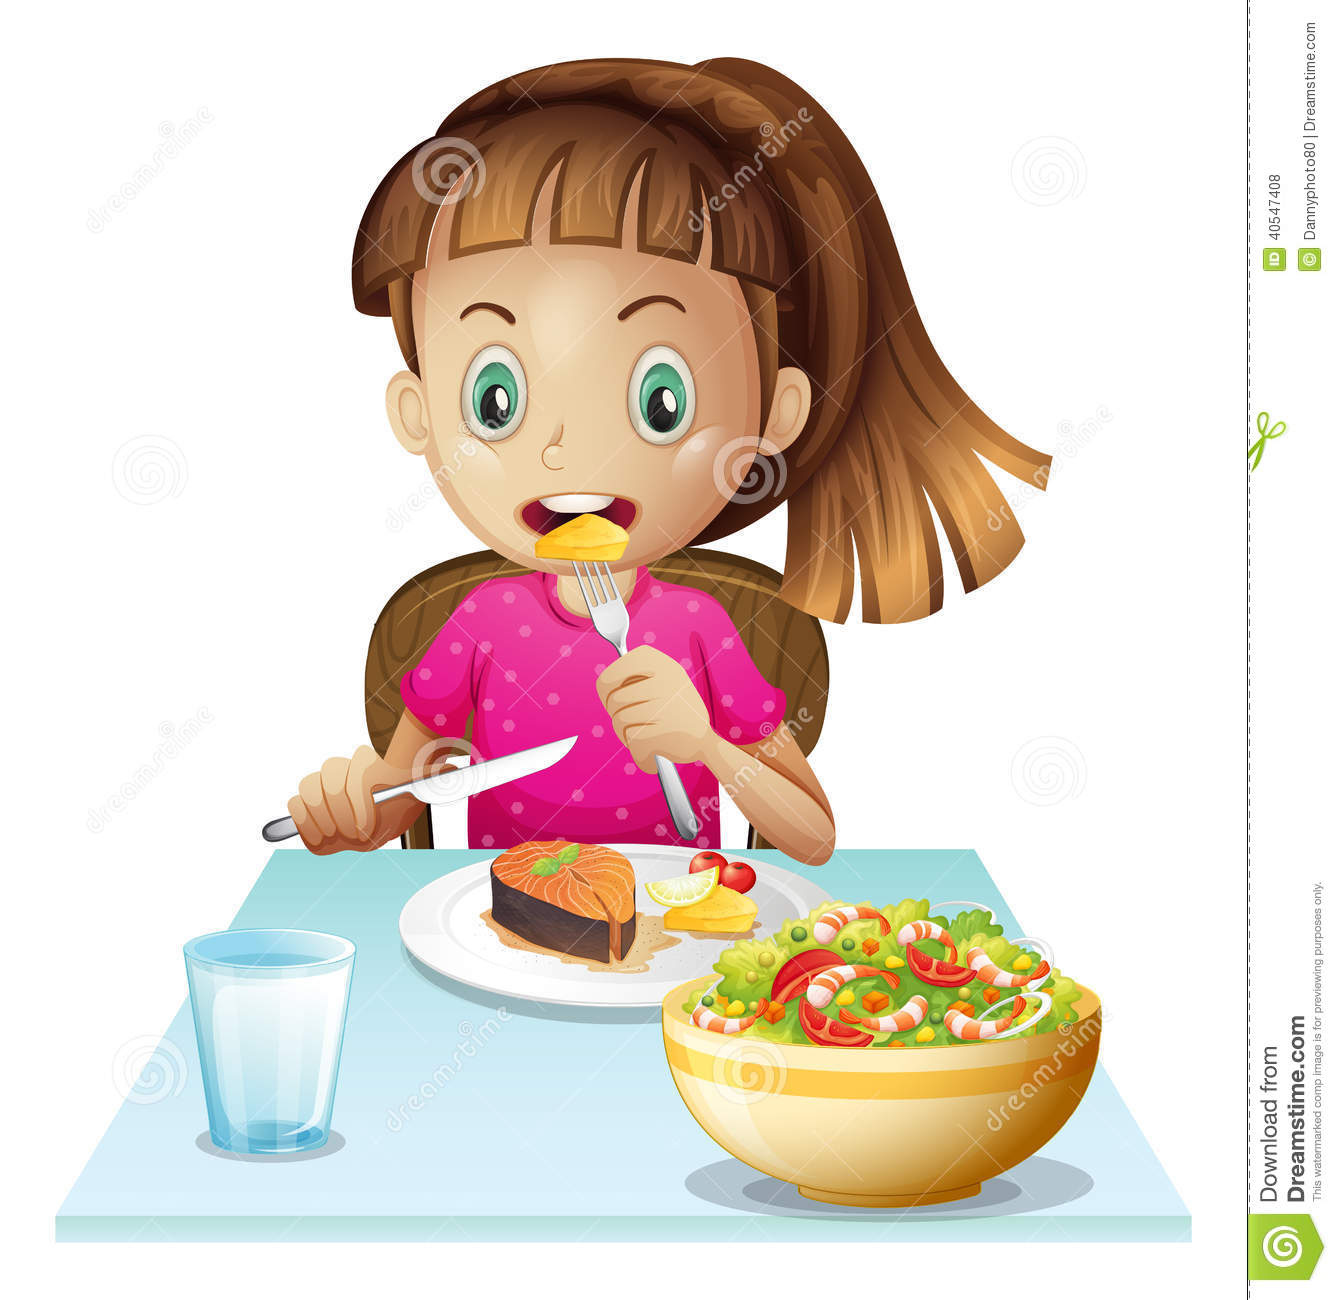 Illustration Of A Little Girl Eating Lunch On A White Background